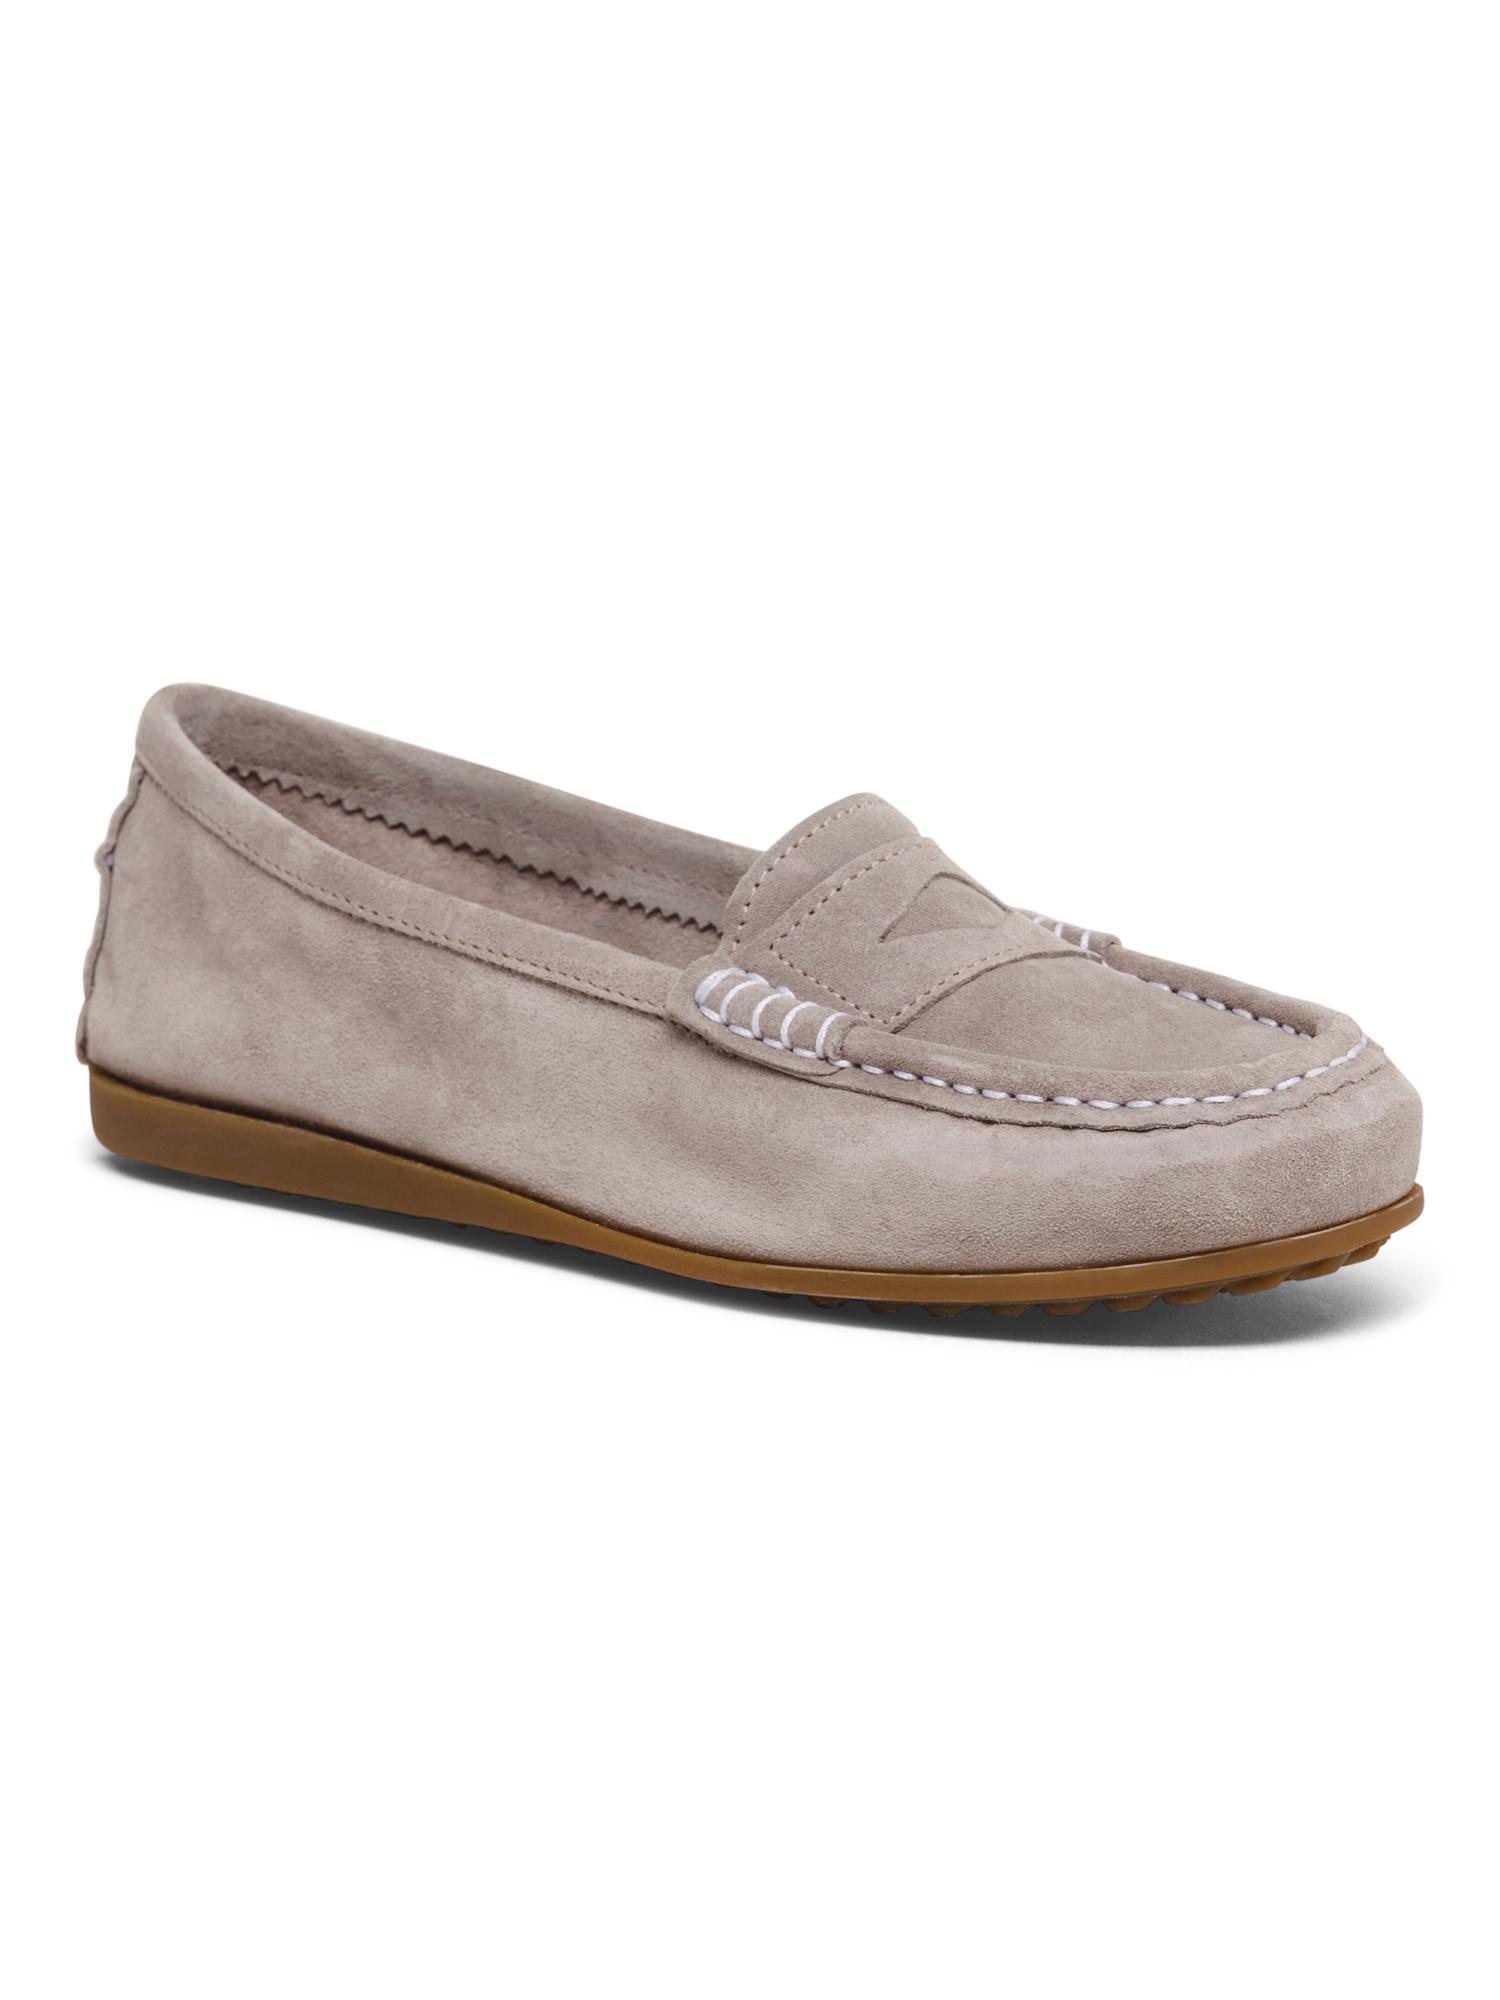 Tj Maxx Made In Italy Suede Driver Flex Sole Flats in Gray